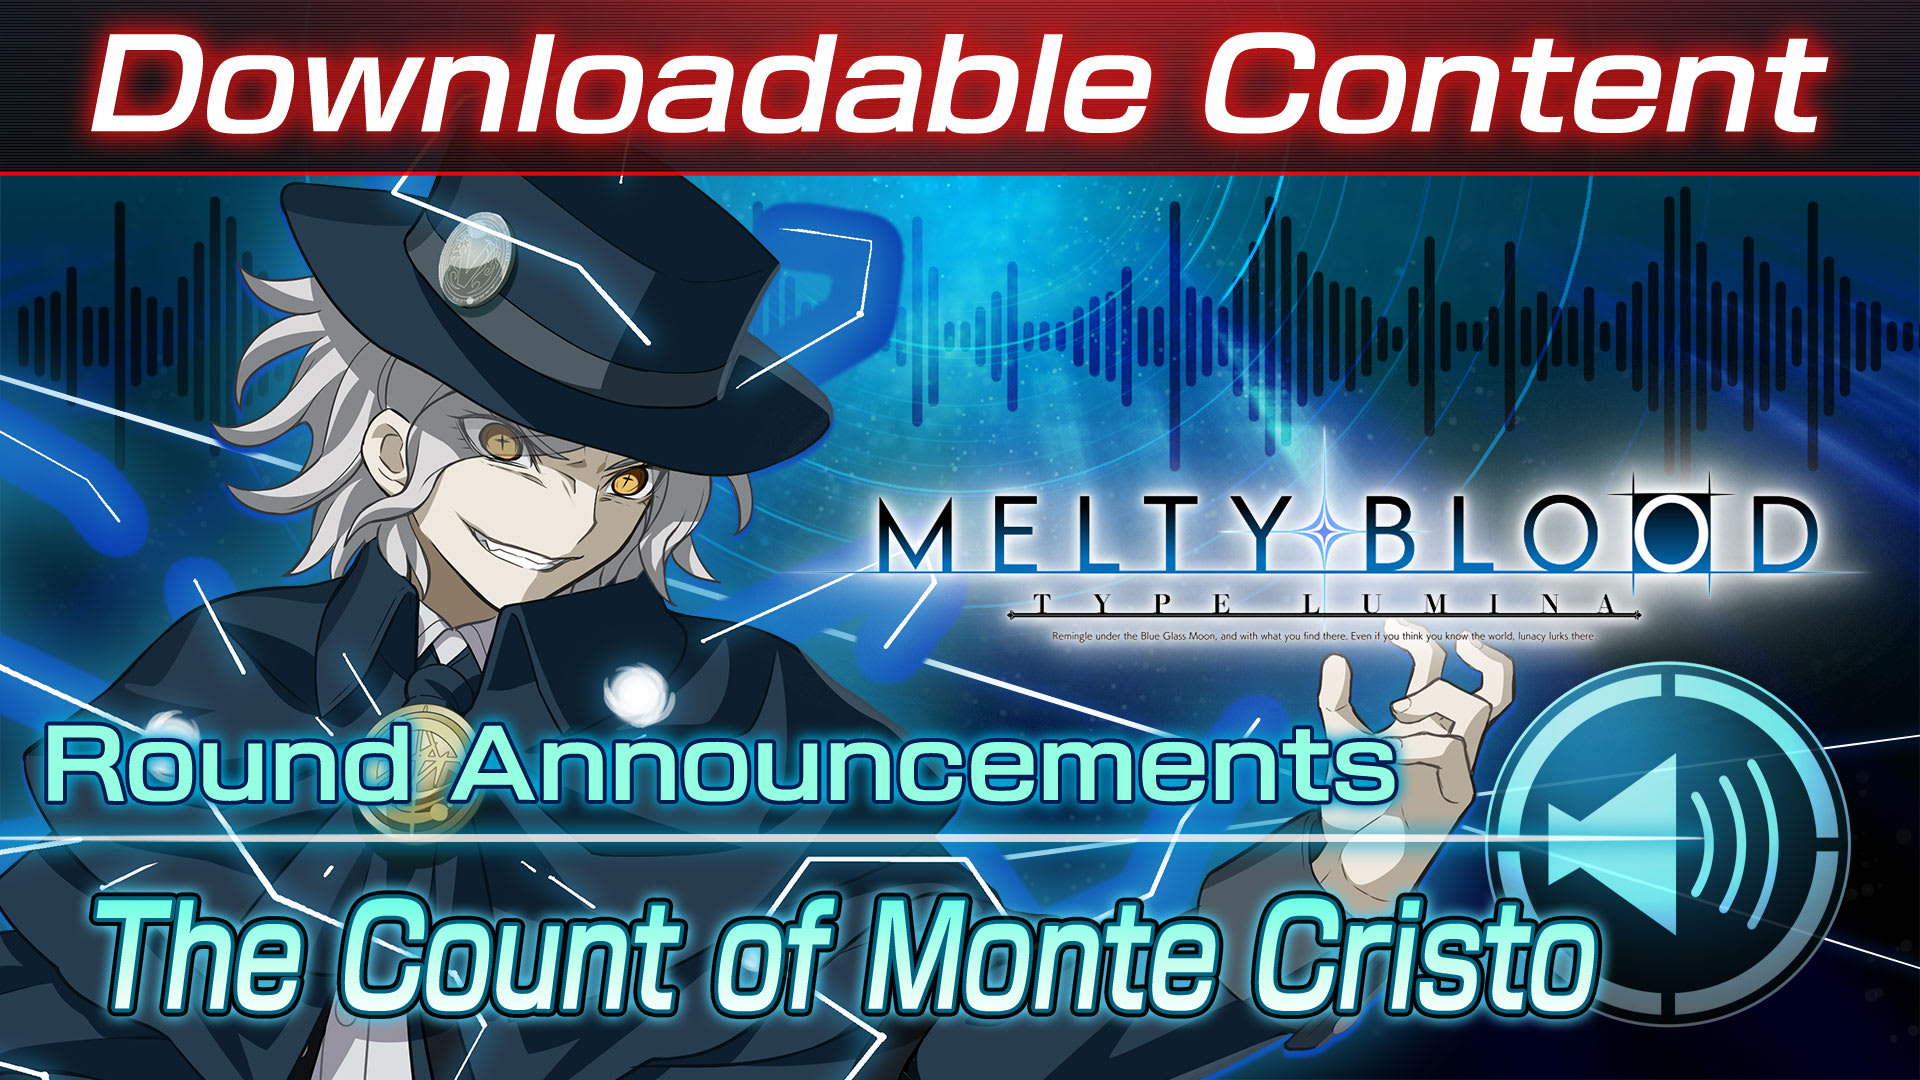 DLC: The Count of Monte Cristo Round Announcements